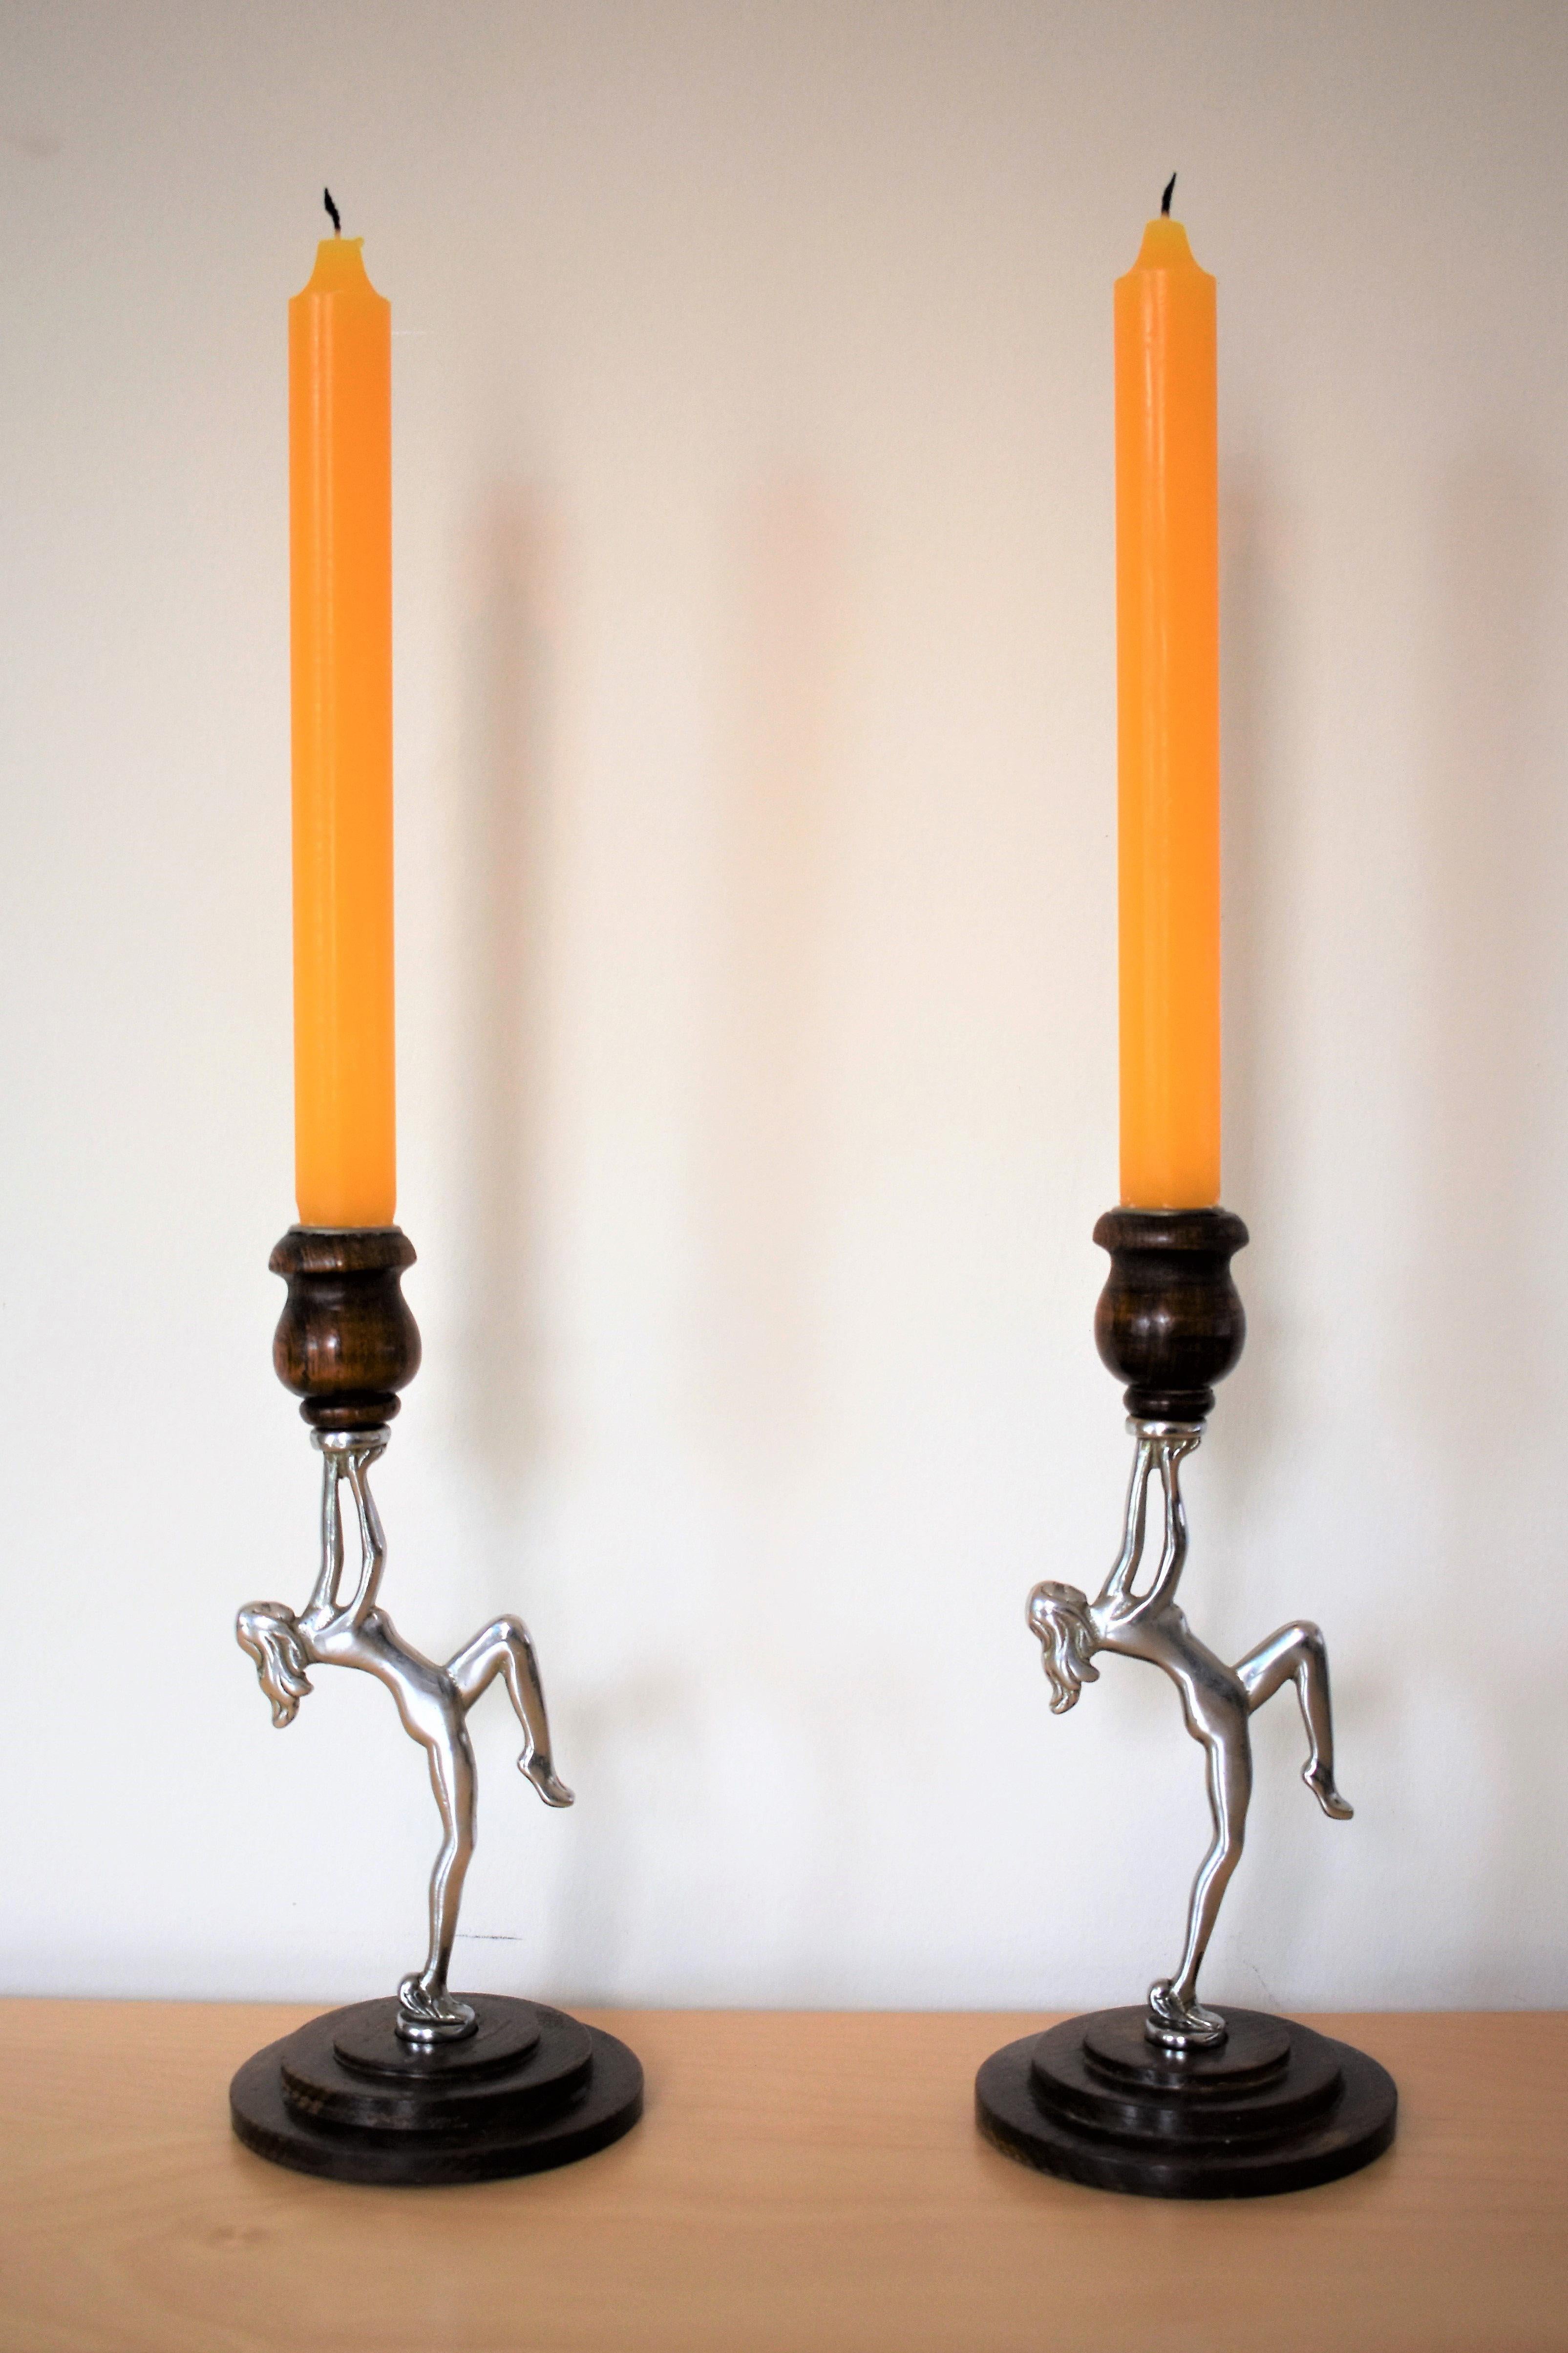 A pair of lovely typical art deco candlesticks dating from the 1930’s. The candlesticks are both in very good condition and they have a beautiful patina. 

If you have any questions or would like to see more pictures, please send a message.